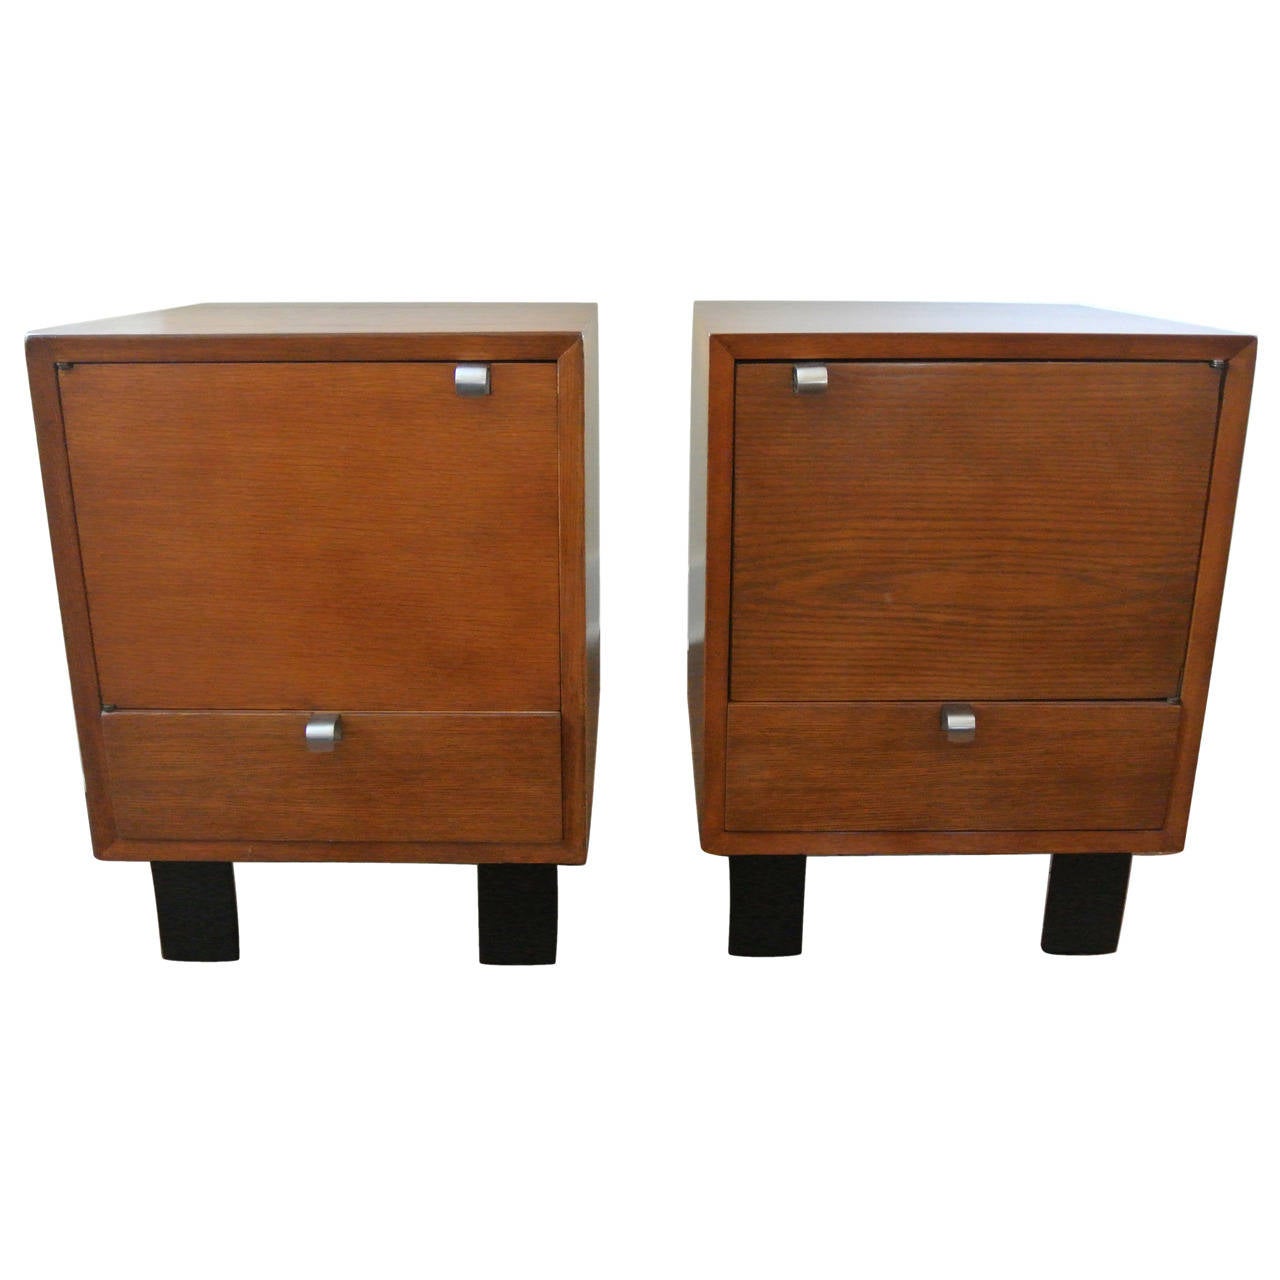 Early and original George Nelson for Herman Miller end tables/ nightstands, Model 4617, circa 1947.  Fully restored, these chests feature combed oak, lacquered wood feet, and aluminium pulls.

Literature: 
-George Nelson: Architect, Writer,